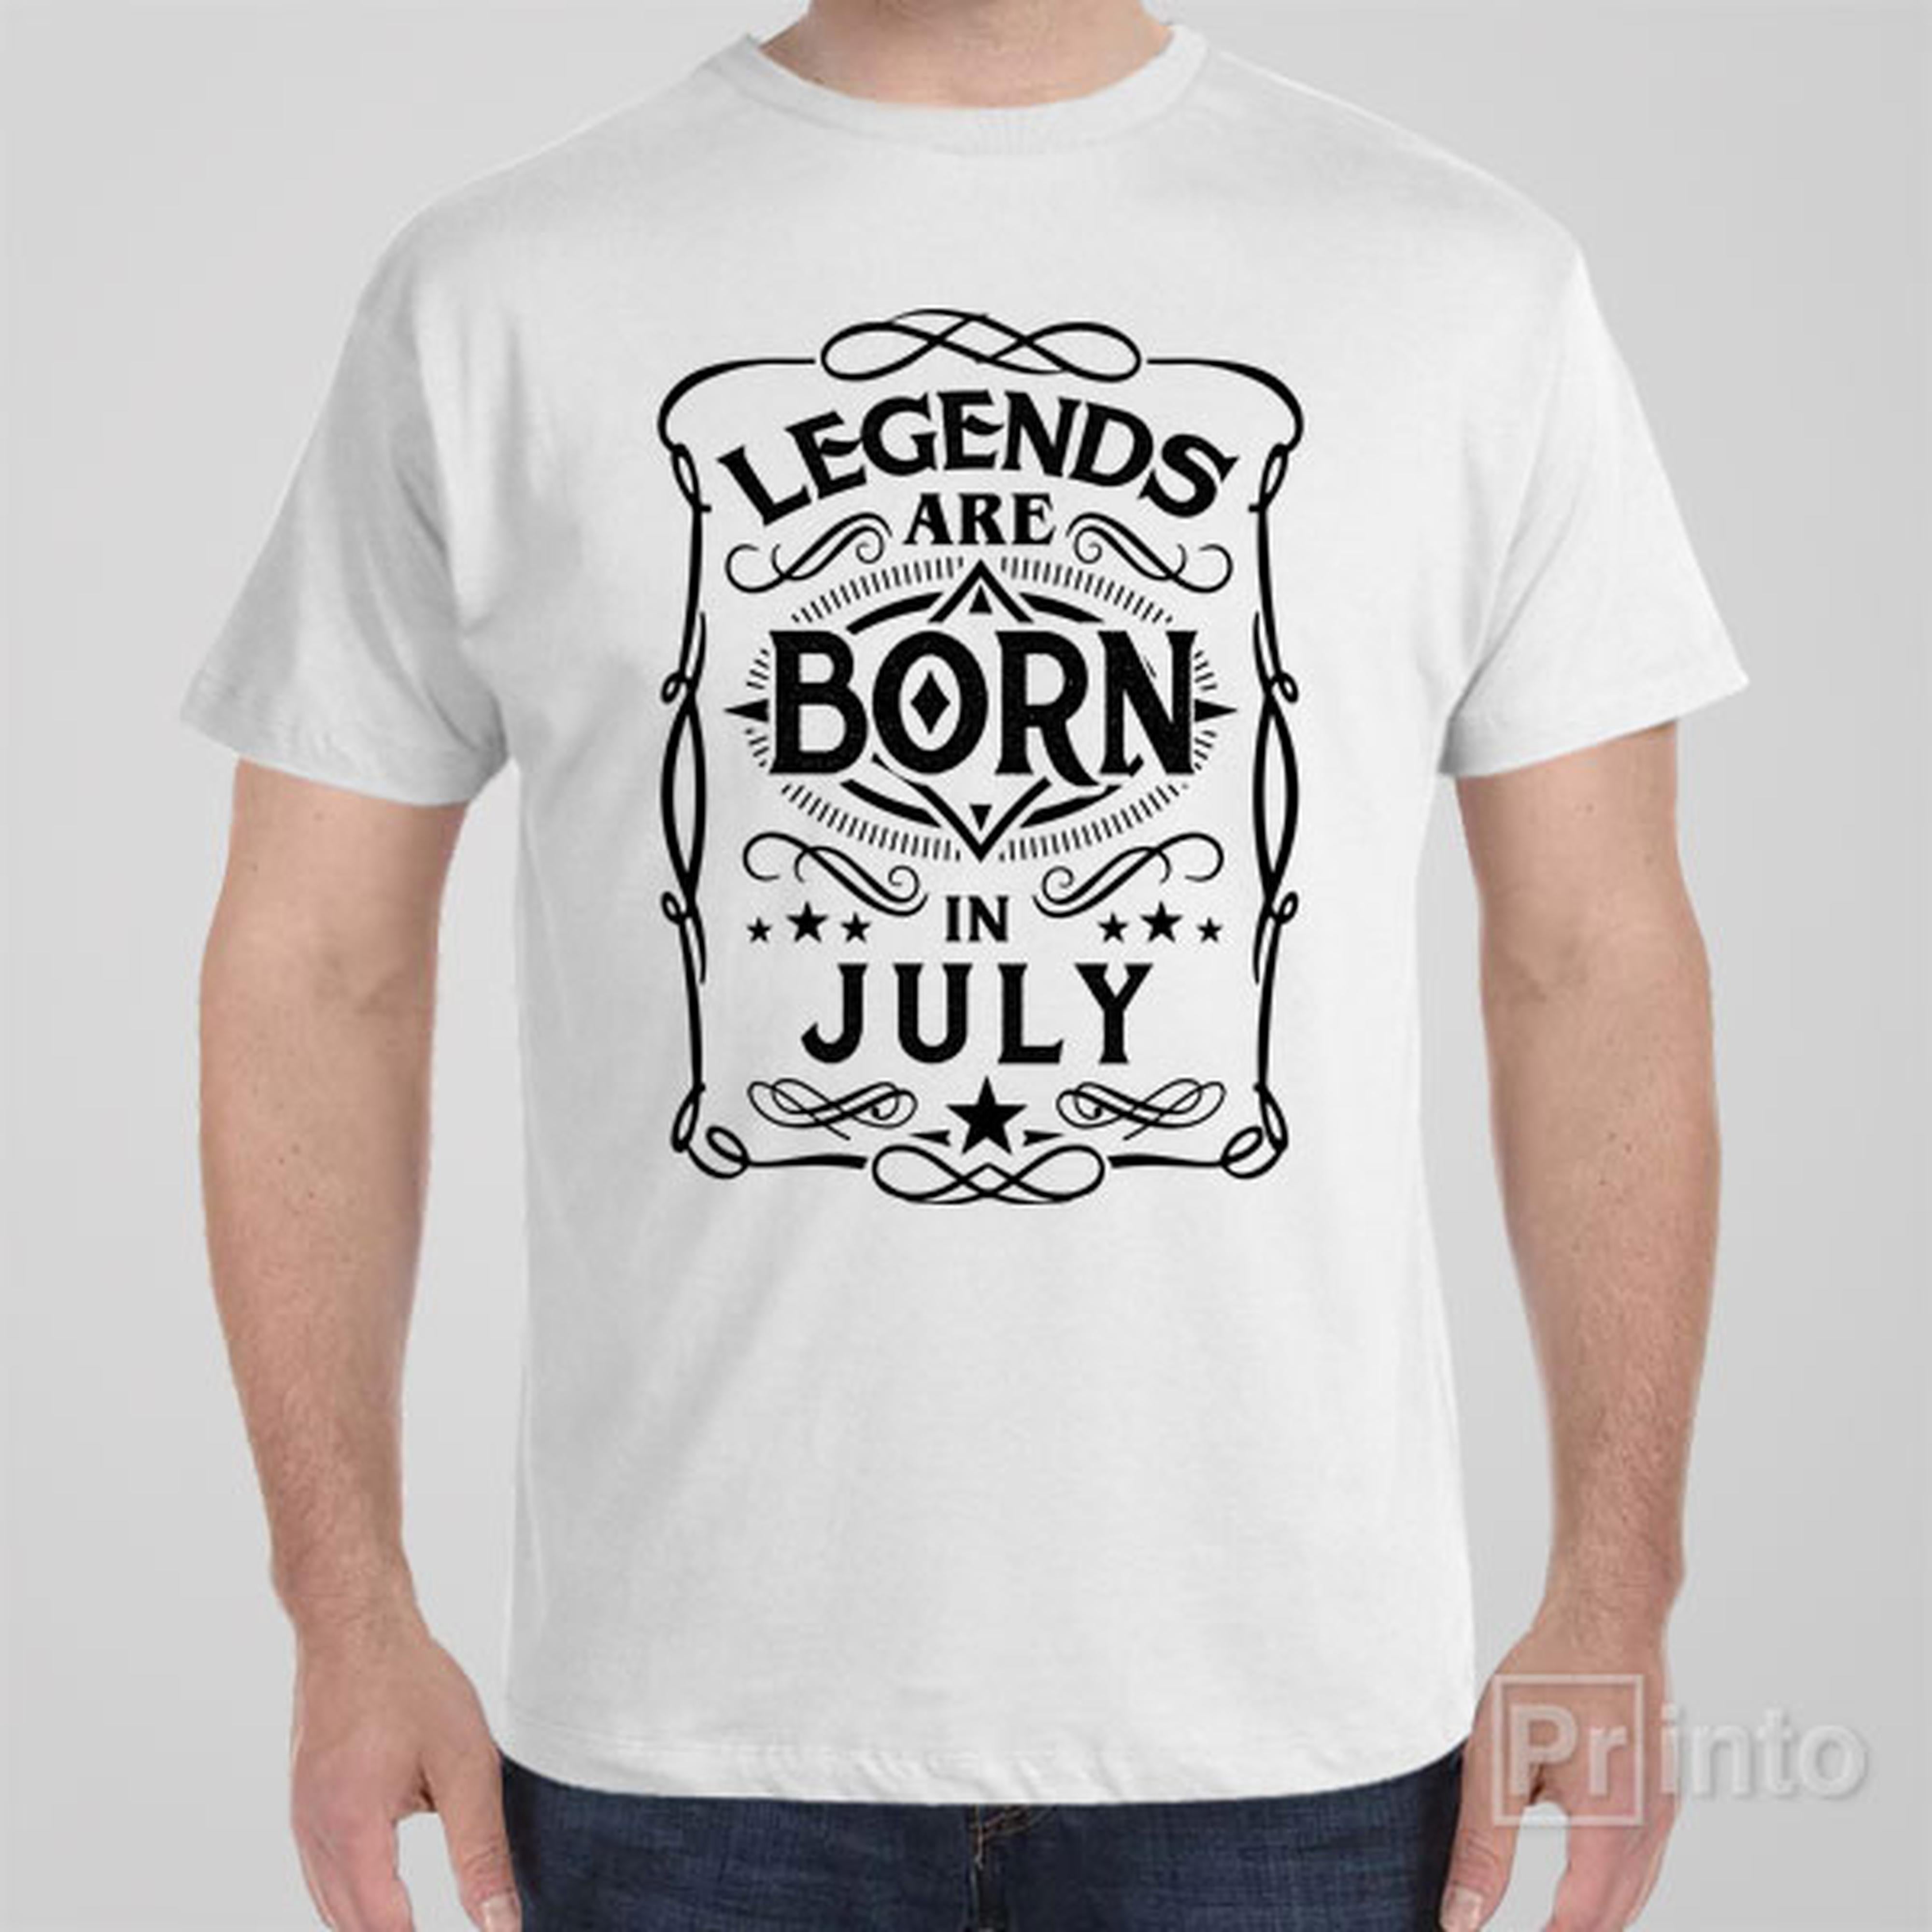 legends-are-born-in-july-t-shirt